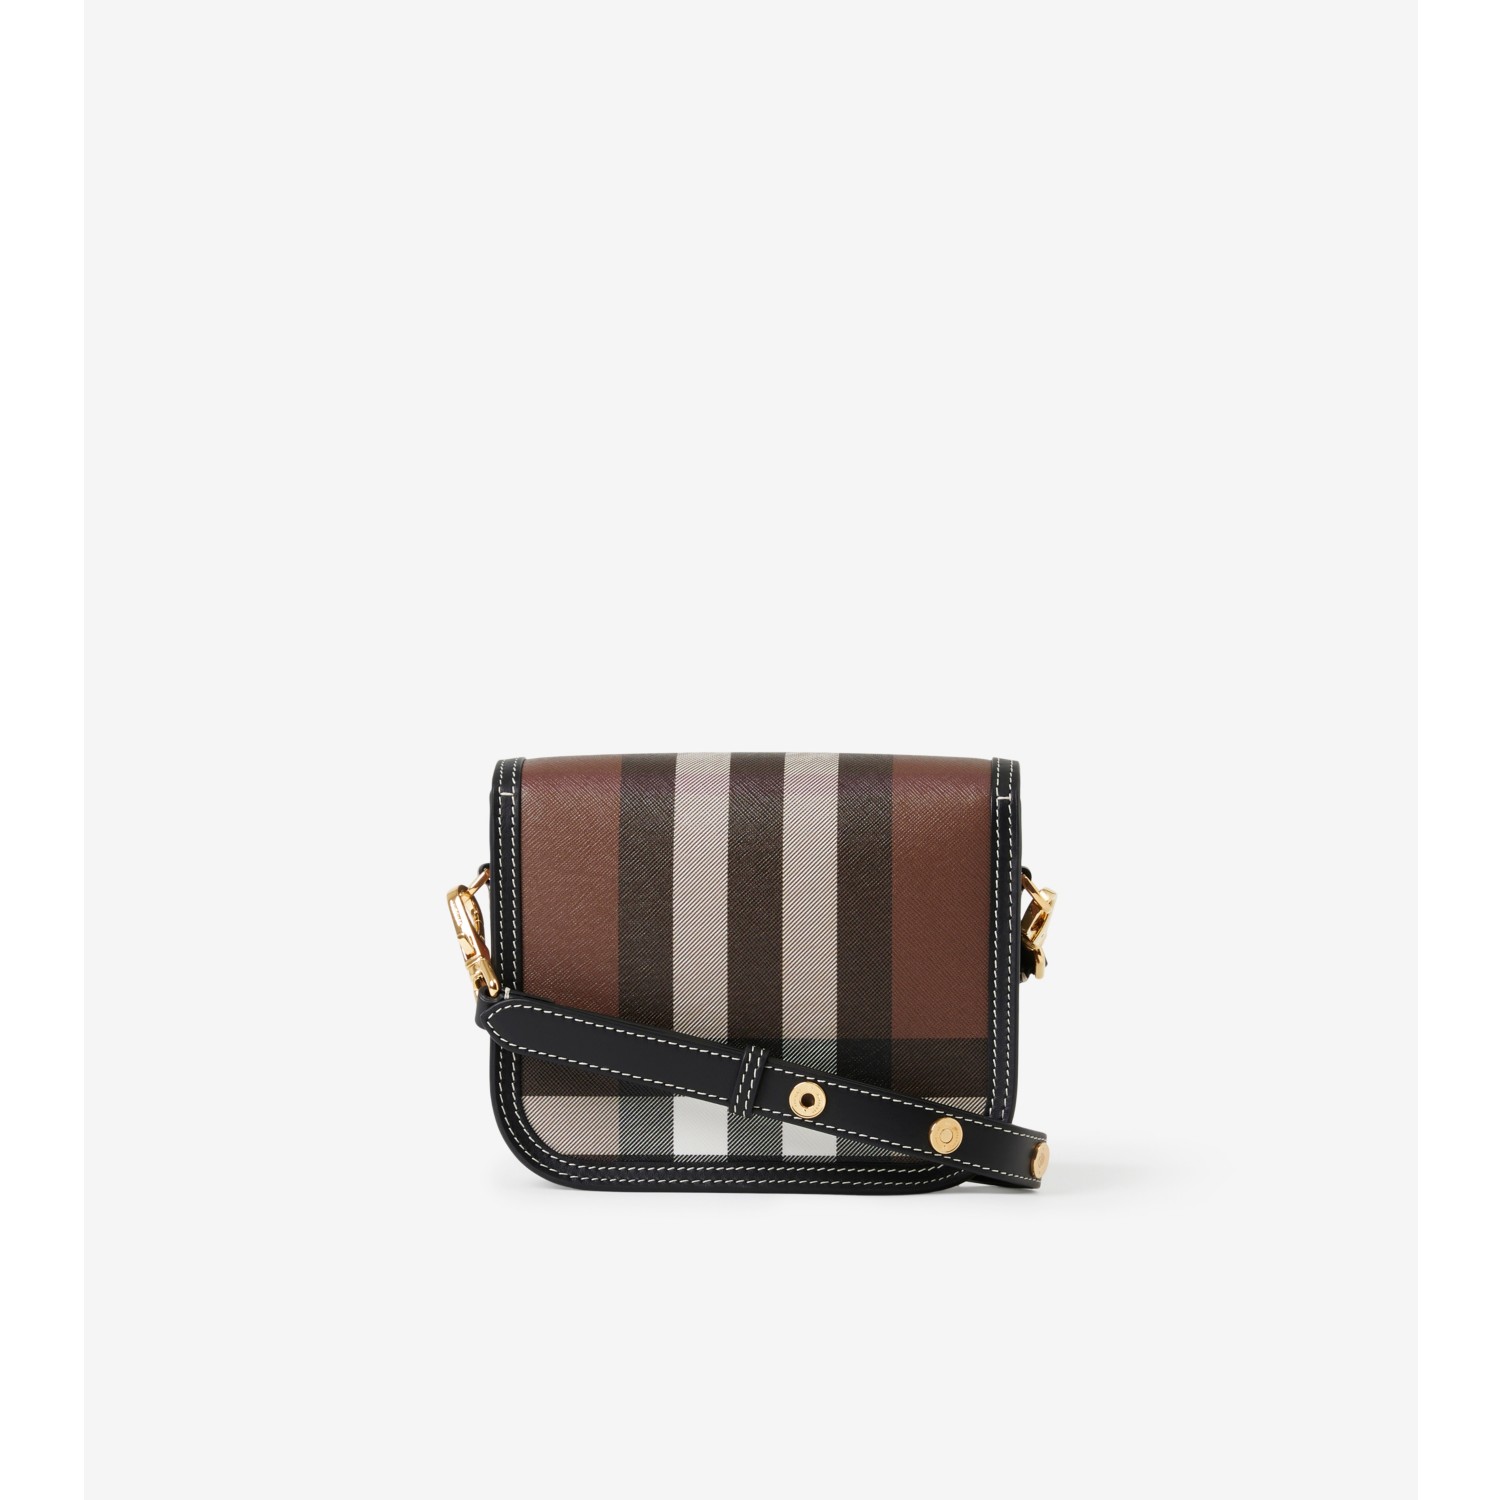 BURBERRY: Elisabeth bag in coated fabric with Dark Birch print - Brown